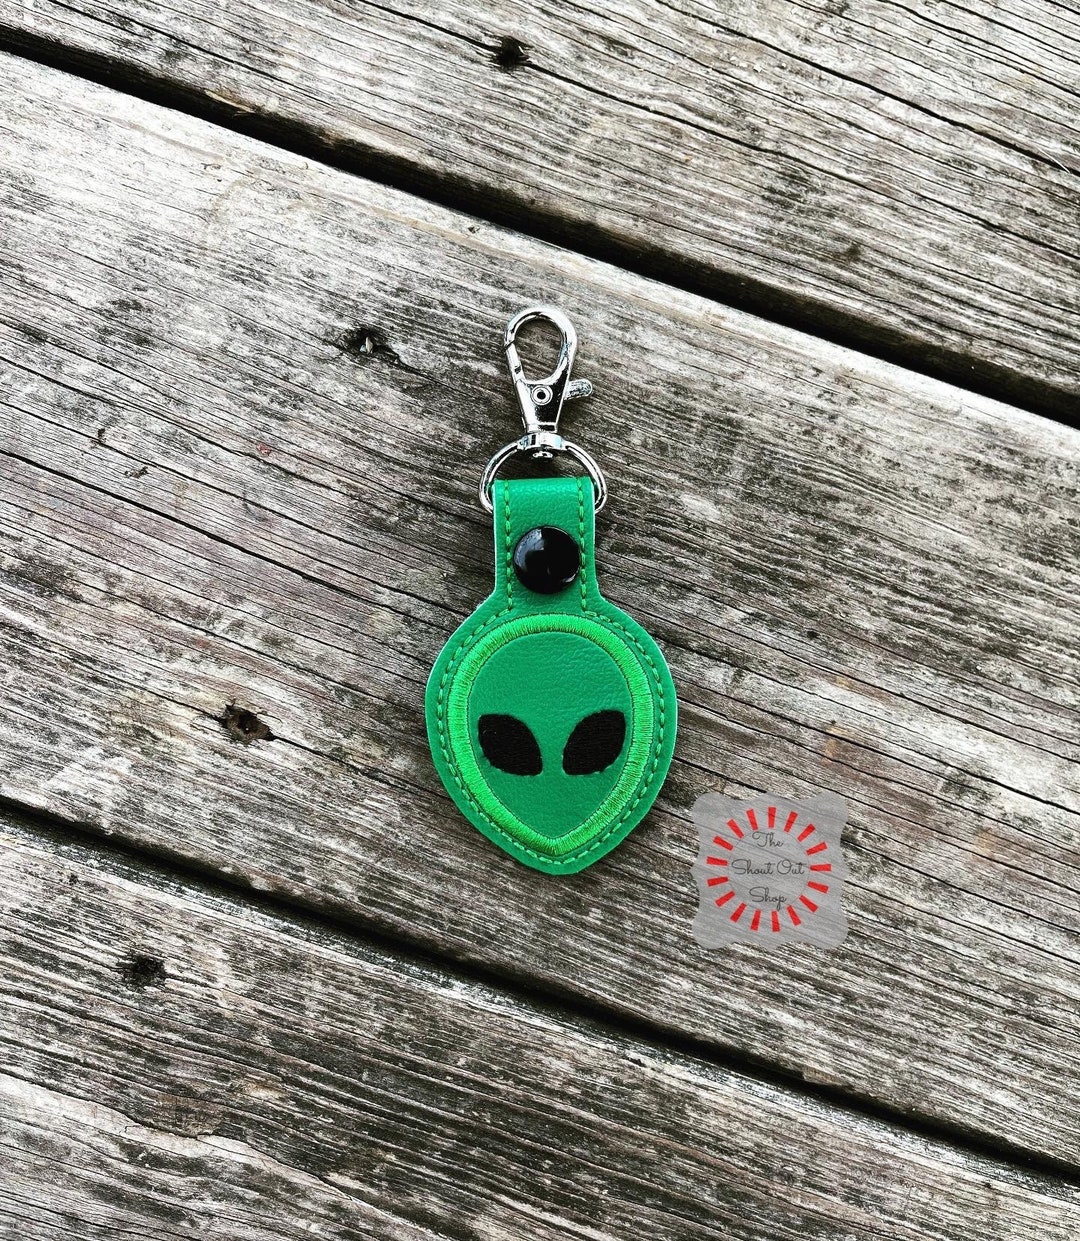 Alien Keychain, Alien Key Chain, Alien Key Ring, Alien Keyring, Martian Key  Chain, Extraterrestrial, Outer Space, UFO, Alien, Spaceship Gift 